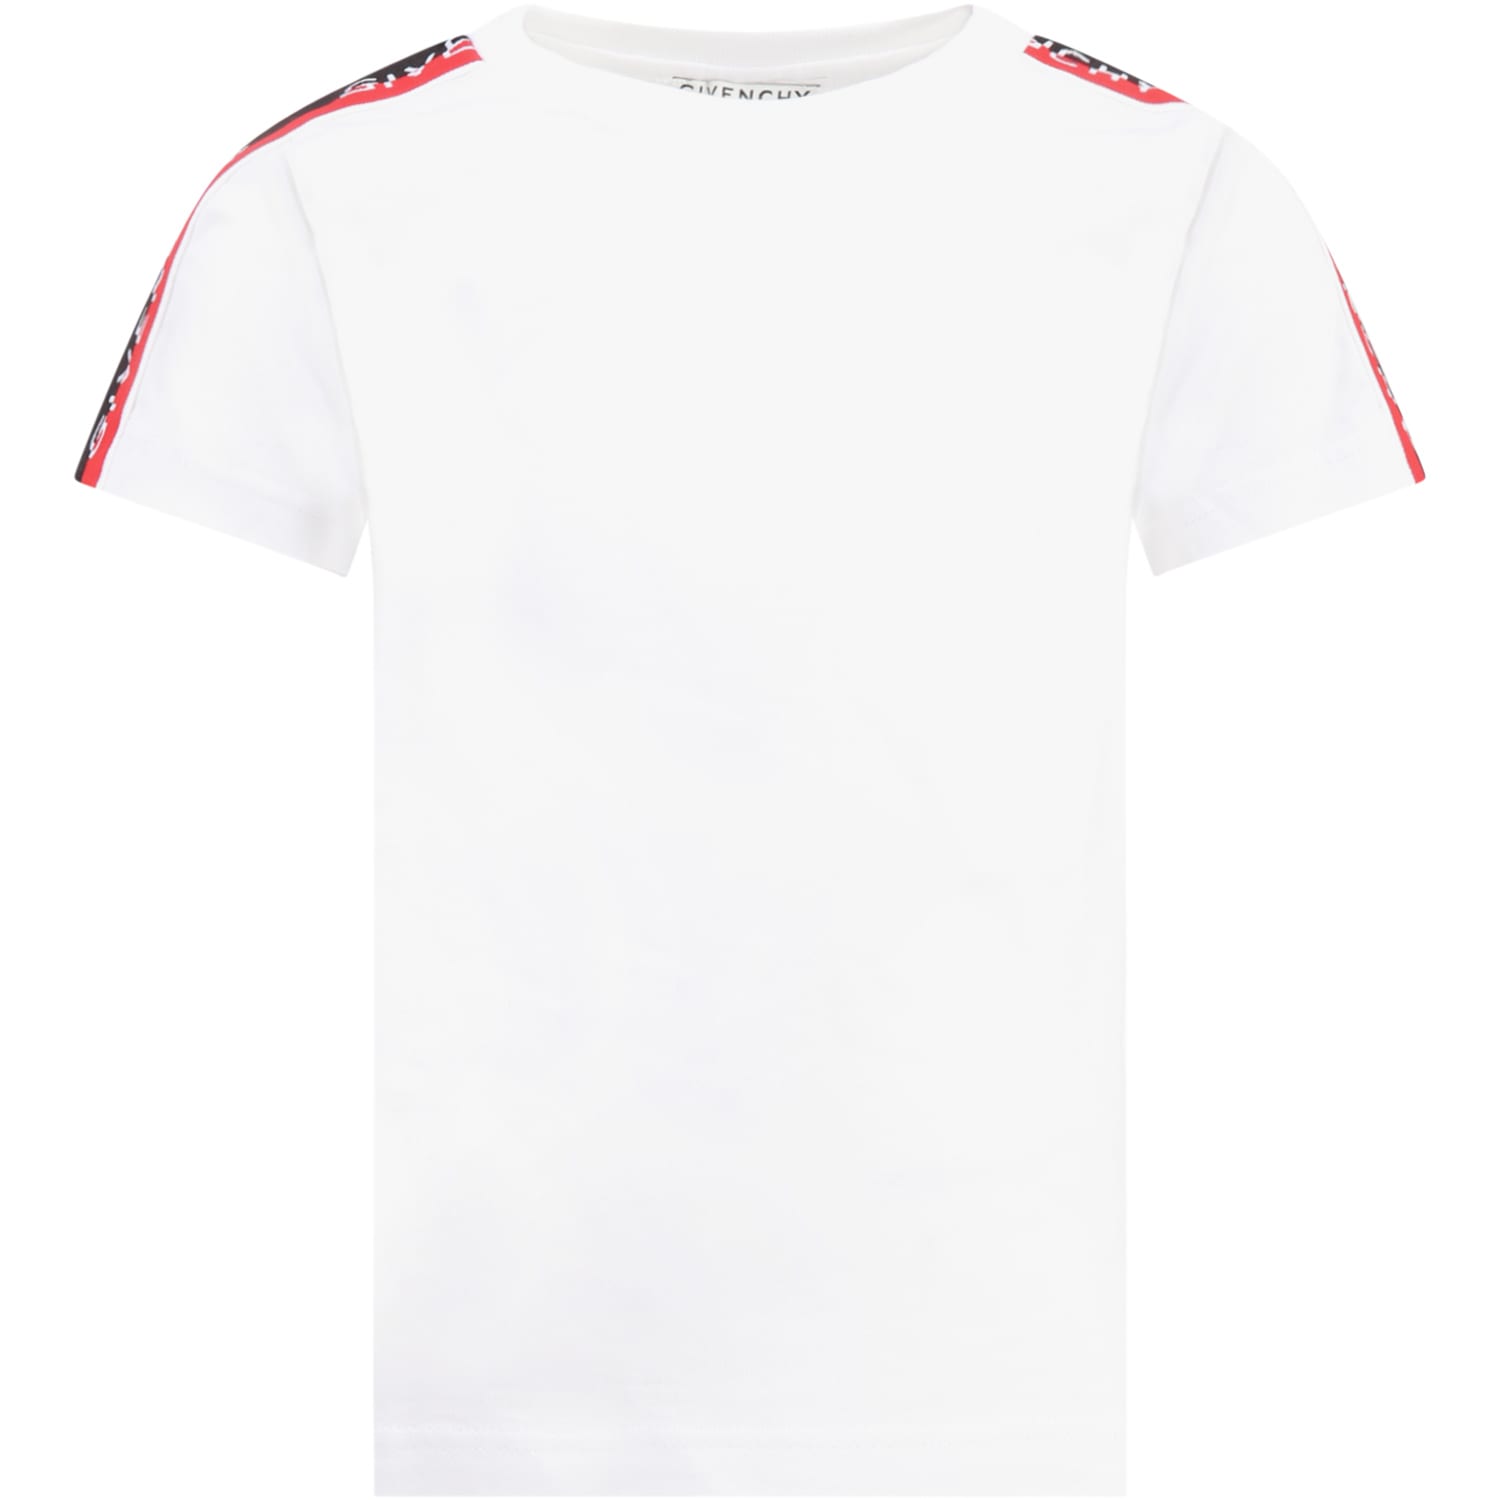 GIVENCHY WHITE T-SHIRT FOR BOY WITH STRIPES,11770986